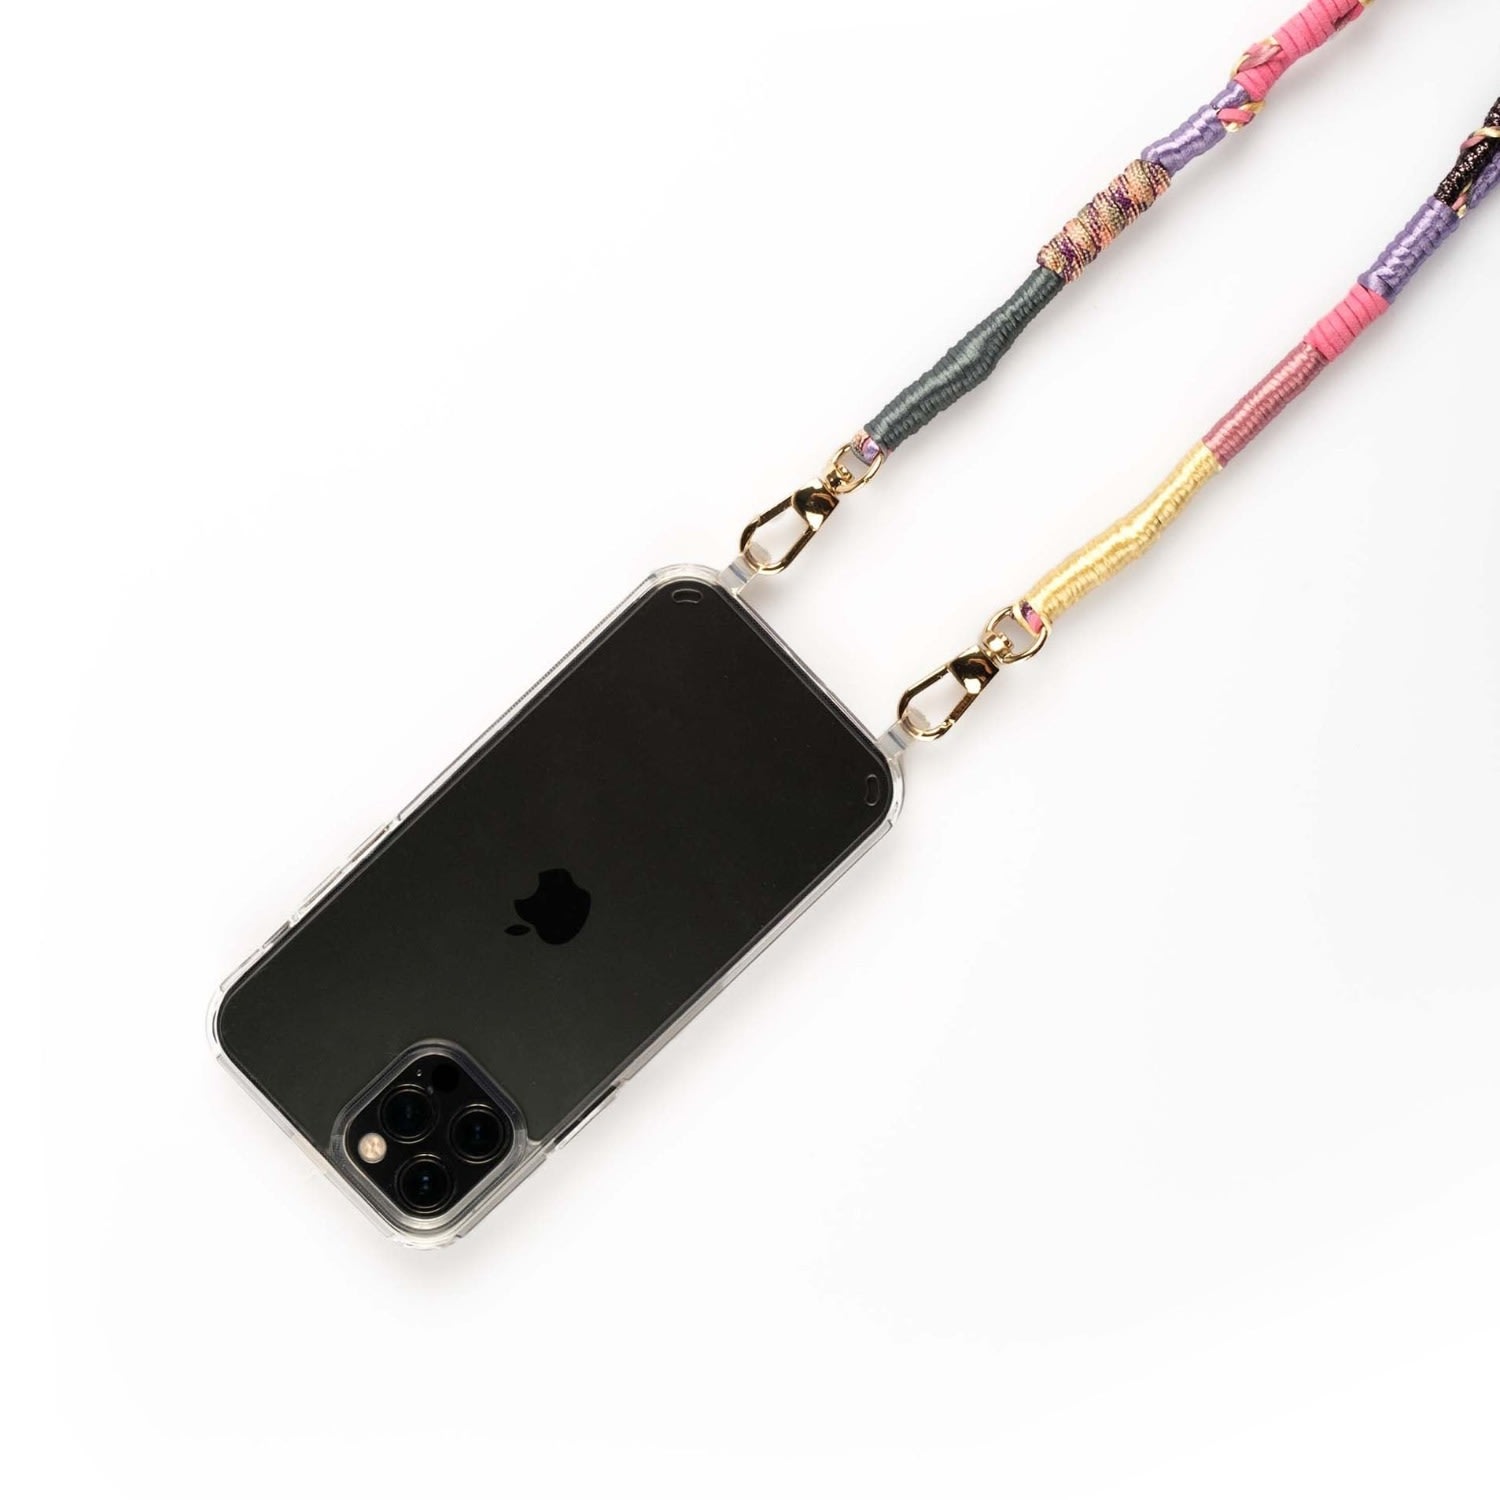 Happy-nes Pink / Purple Delusion Adjustable Phone Strap For Iphone In Black